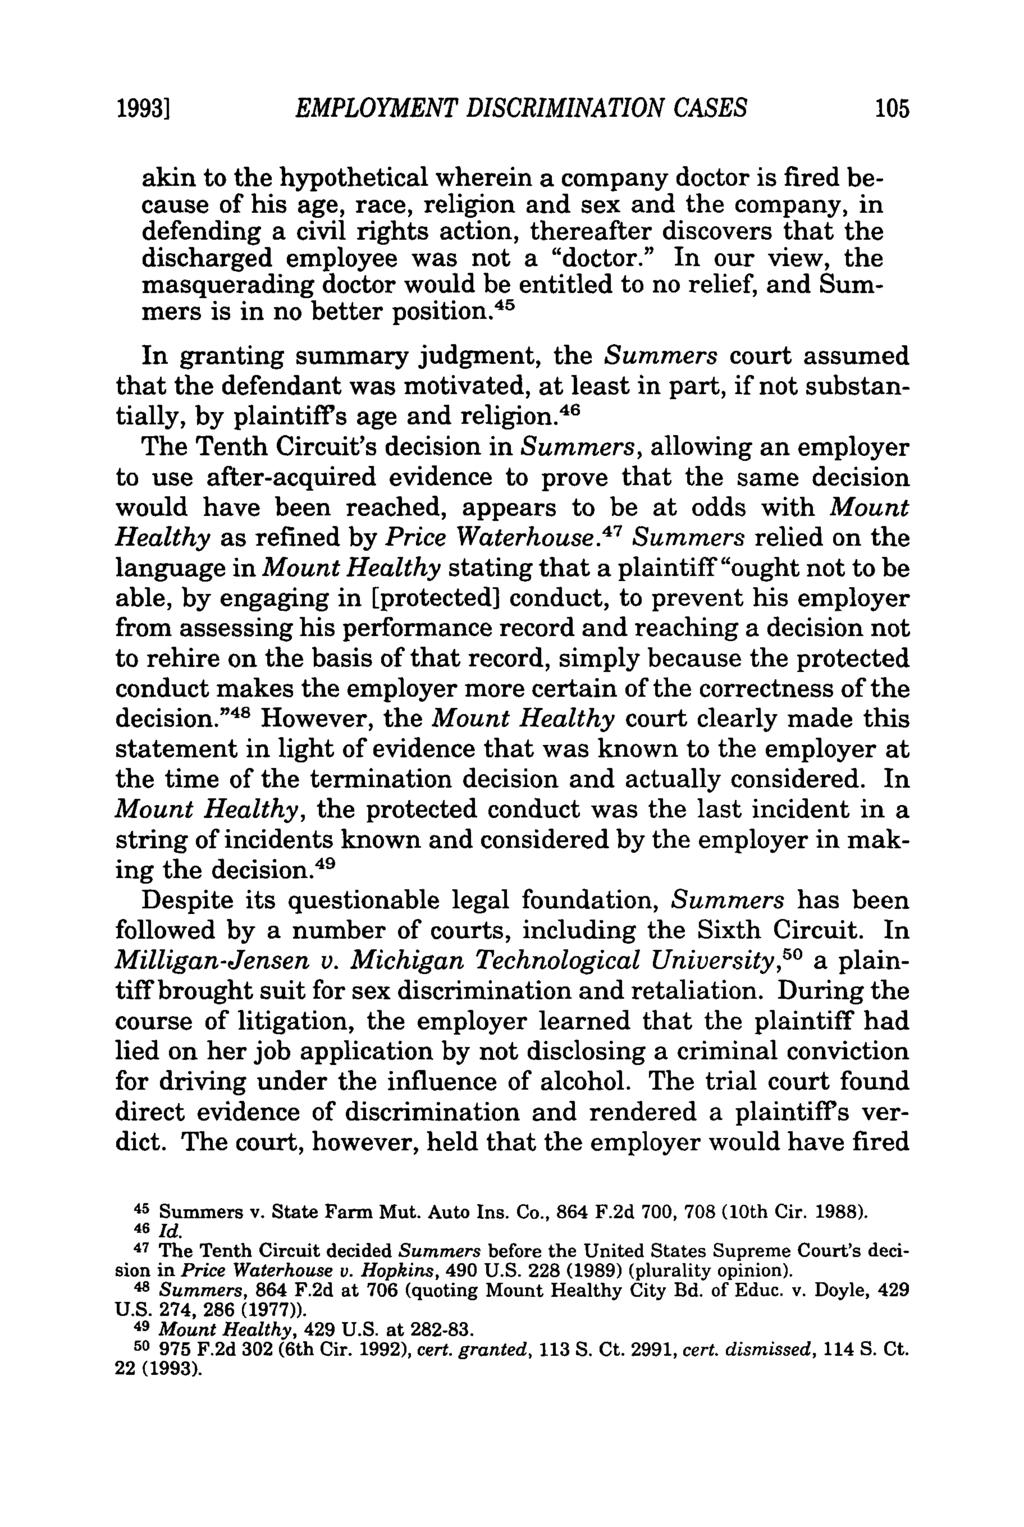 1993] EMPLOYMENT DISCRIMINATION CASES akin to the hypothetical wherein a company doctor is fired because of his age, race, religion and sex and the company, in defending a civil rights action,